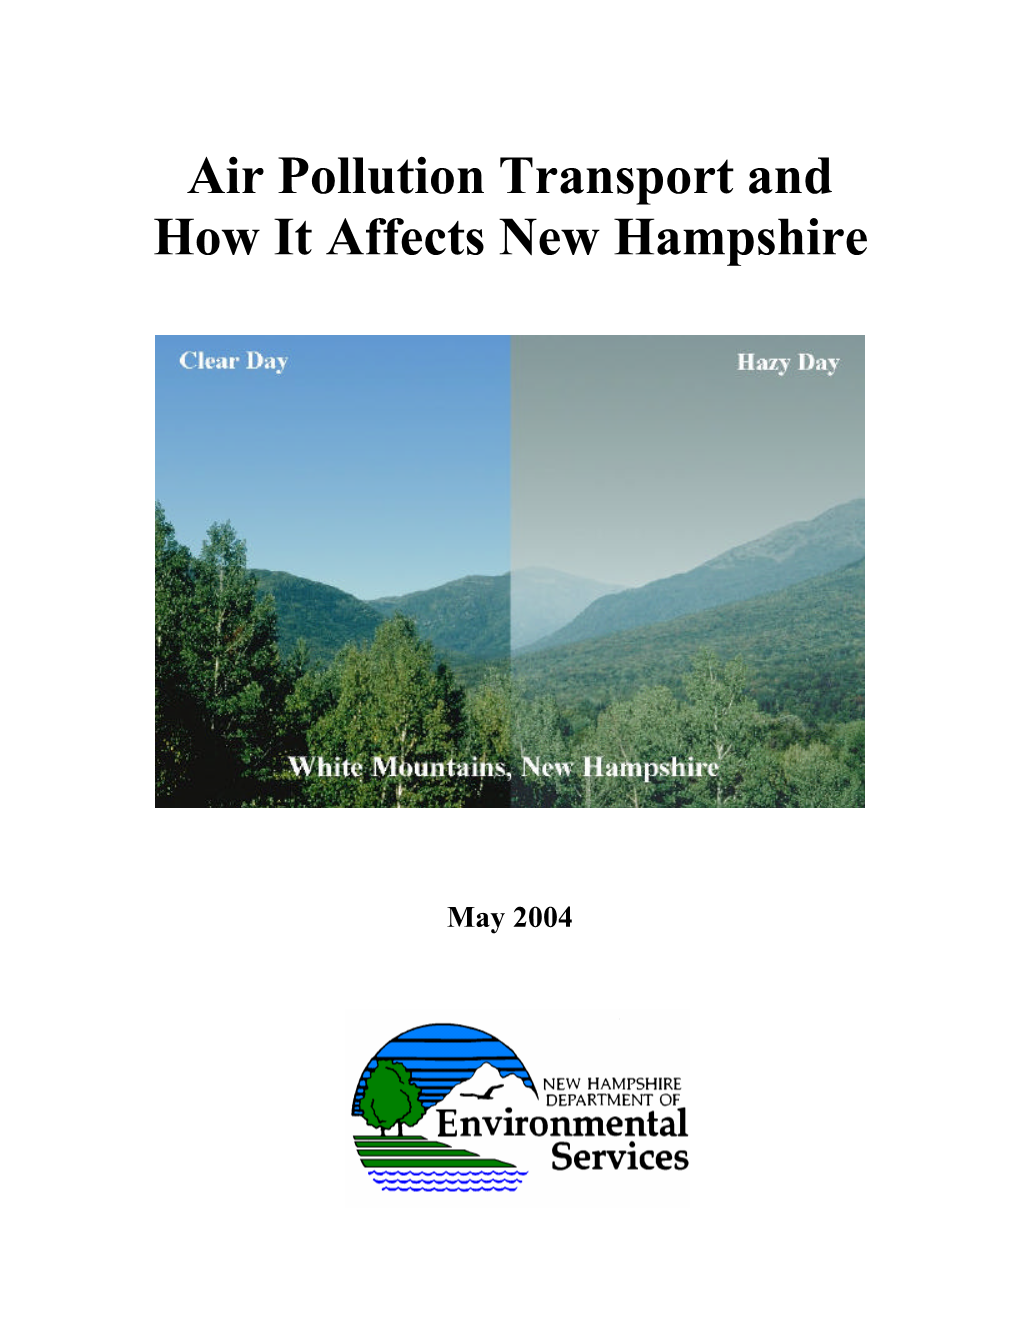 Air Pollution Transport and How It Affects New Hampshire